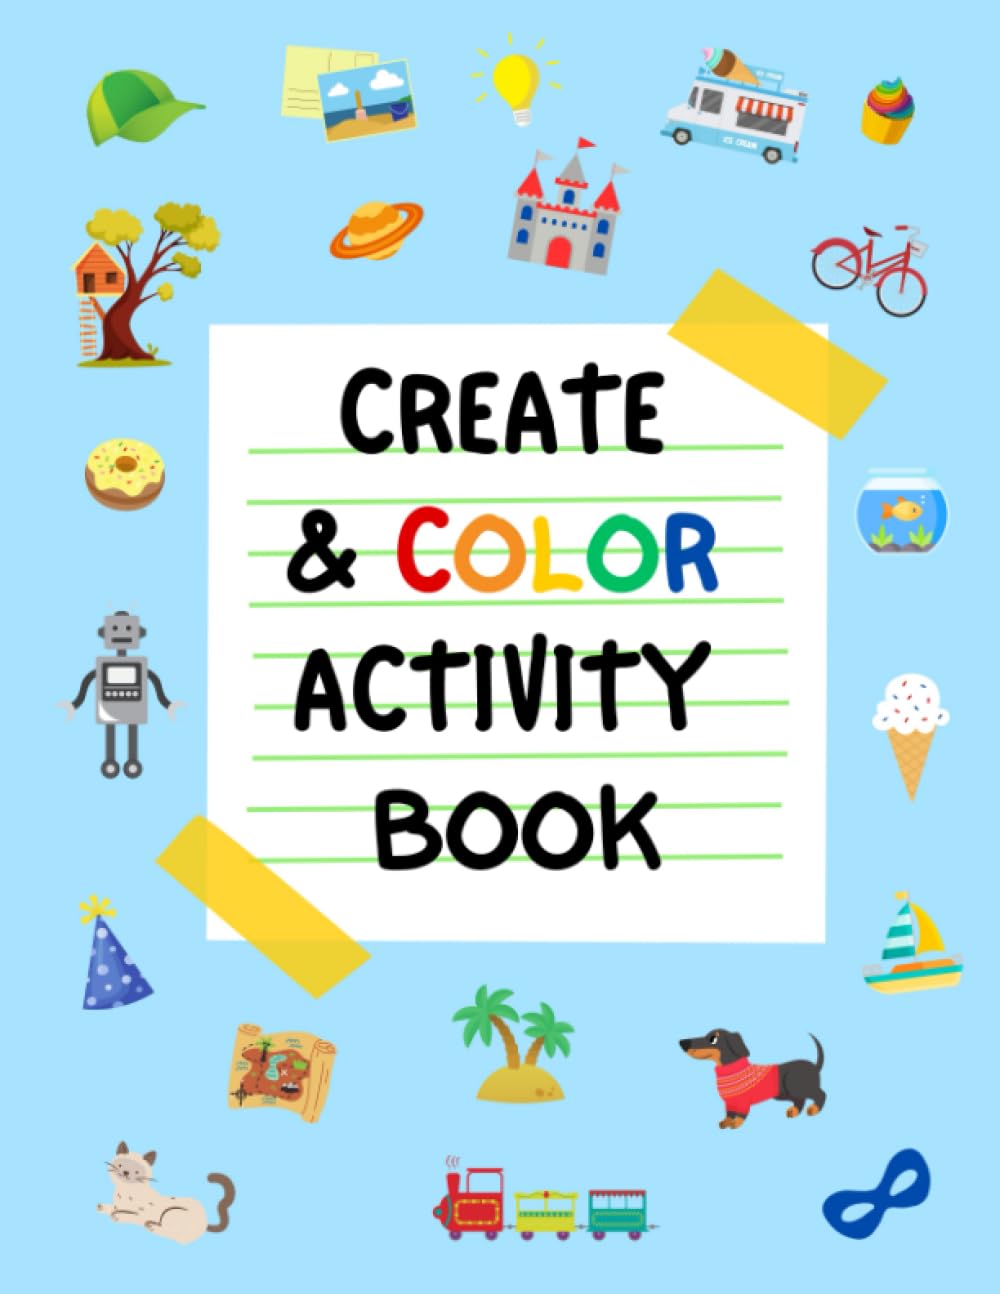 Create and Color Activity Book